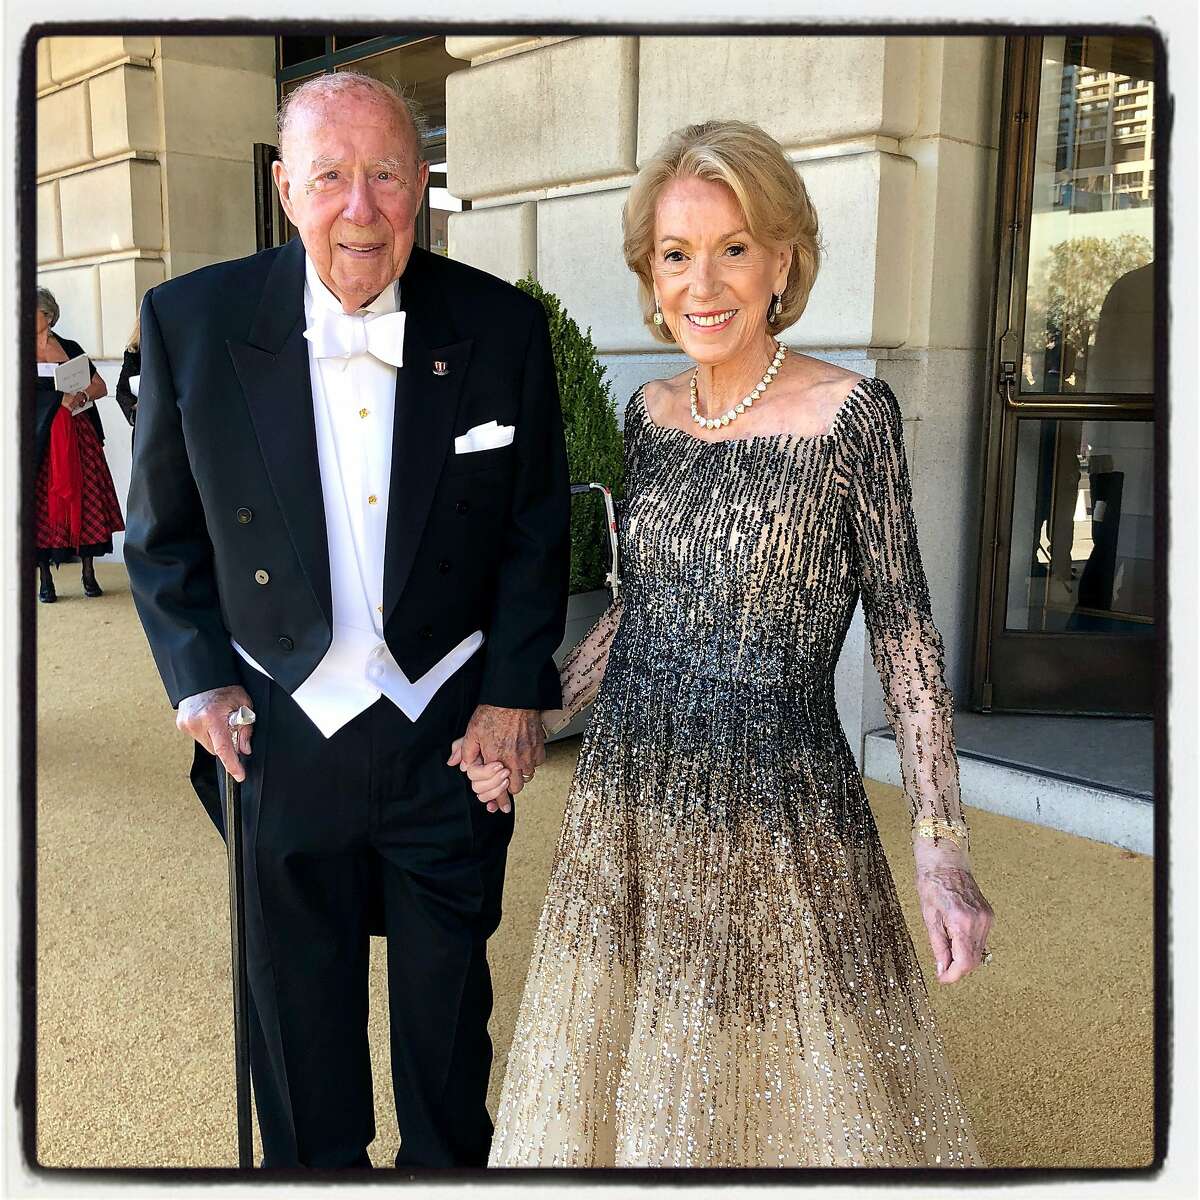 Former Secretary of State George Shultz and his missus, Protocol Chief Charlotte Shultz, at the Opera Ball. Sept. 7, 2018.